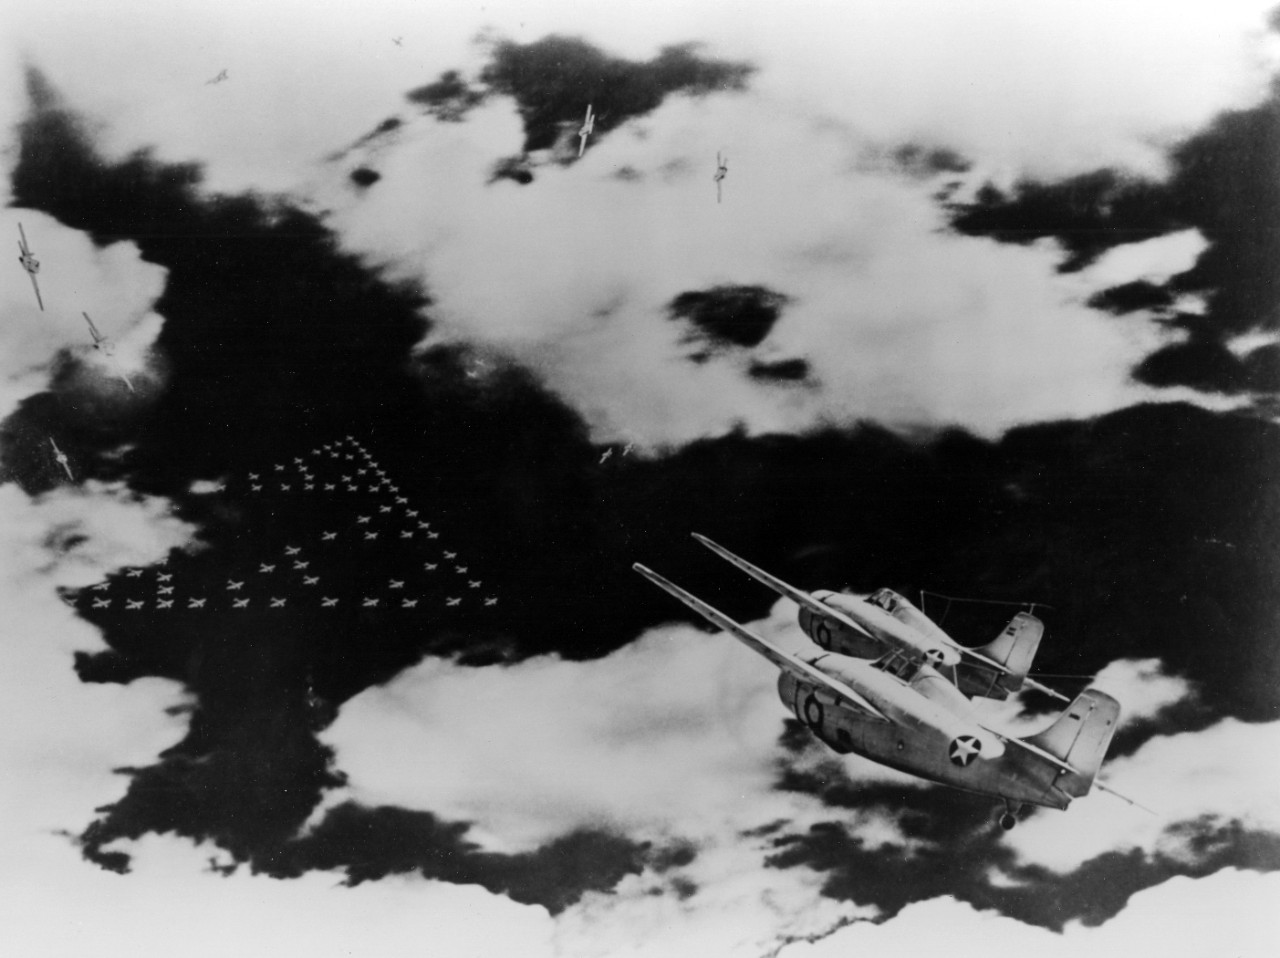 Photo #: 80-G-701850  Battle of Midway, June 1942